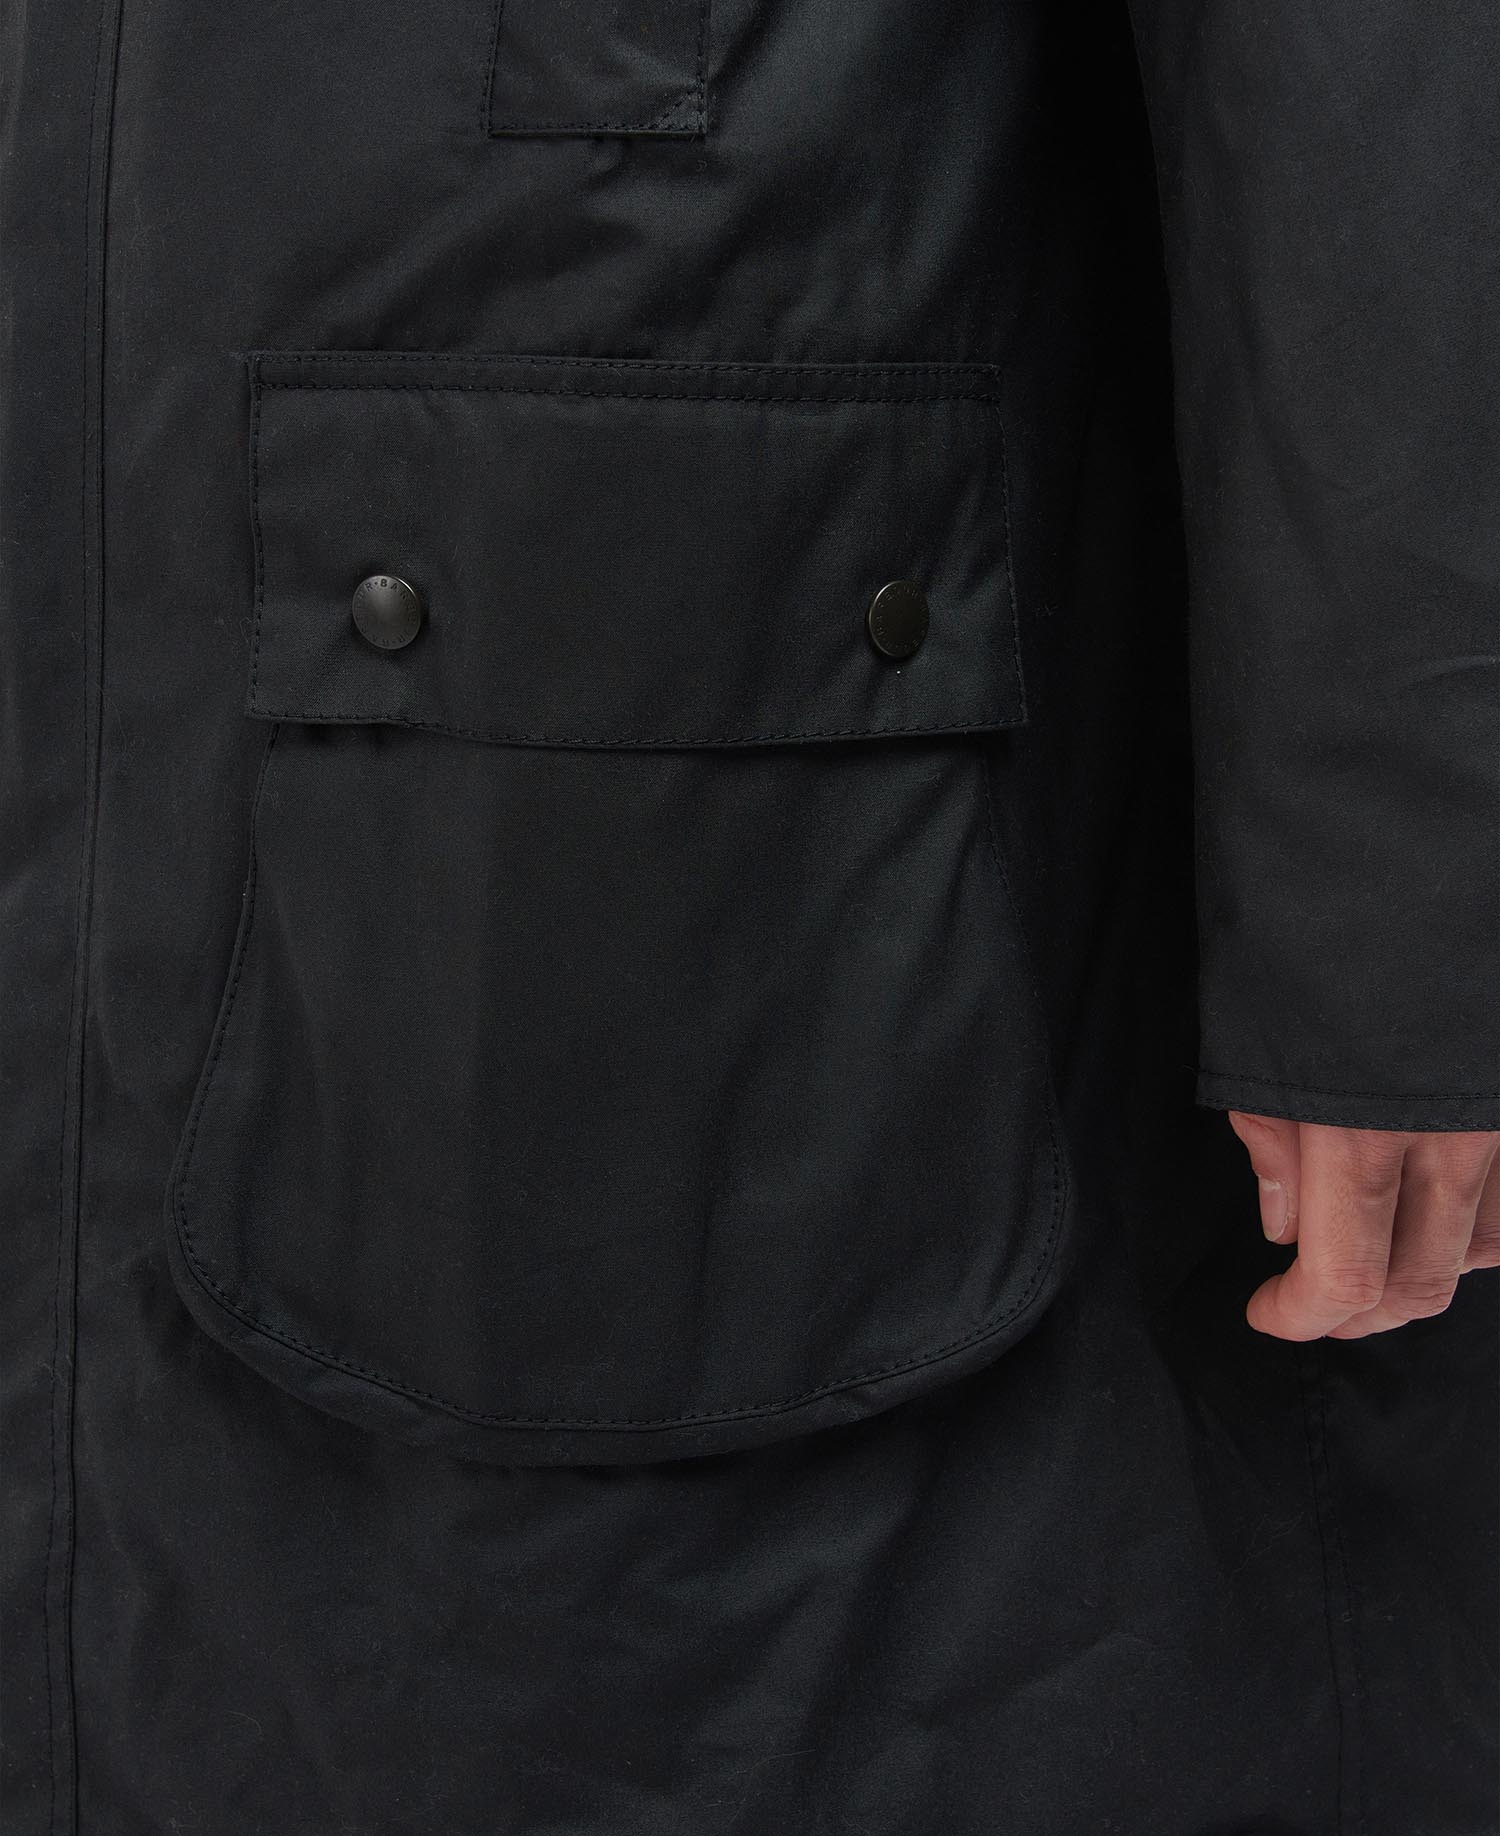 Shop the Barbour OS Border Wax Jacket in Black today. | Barbour